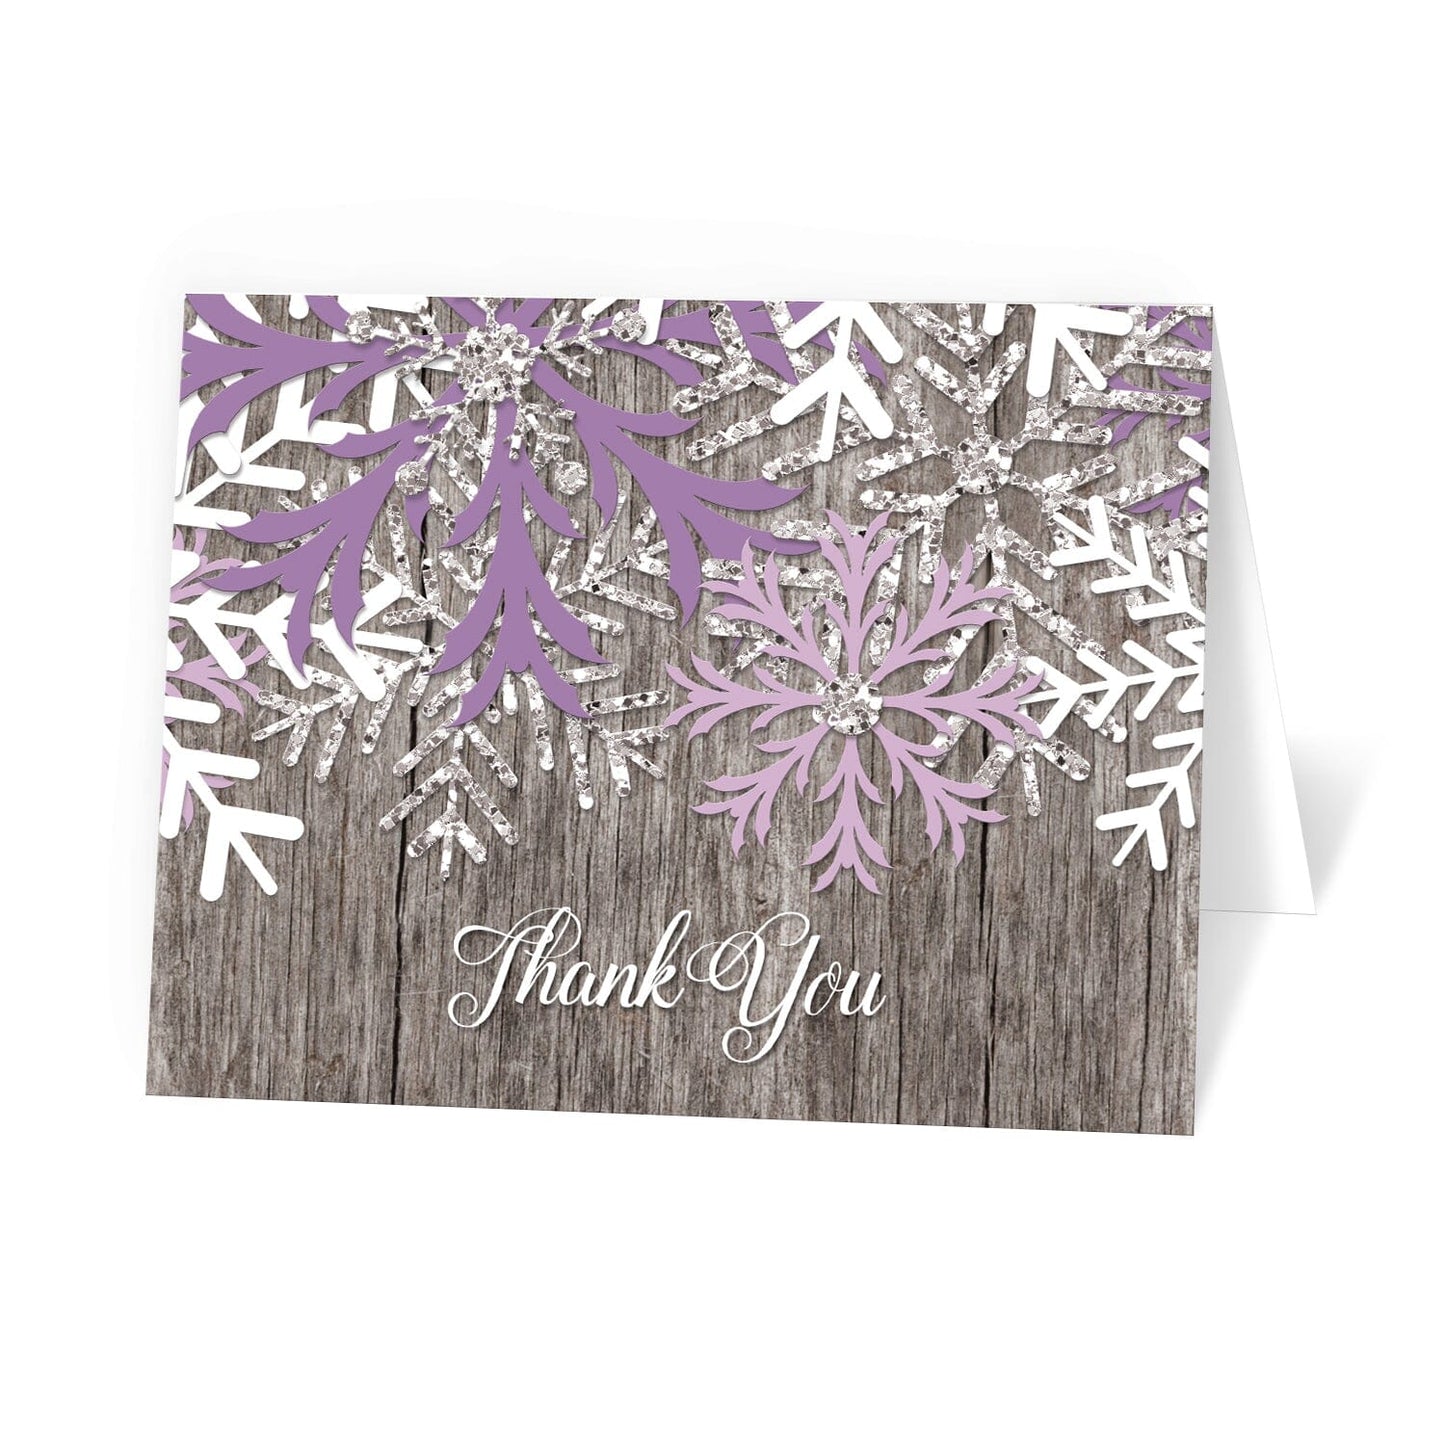 Rustic Winter Wood Purple Snowflake Thank You Cards at Artistically Invited.